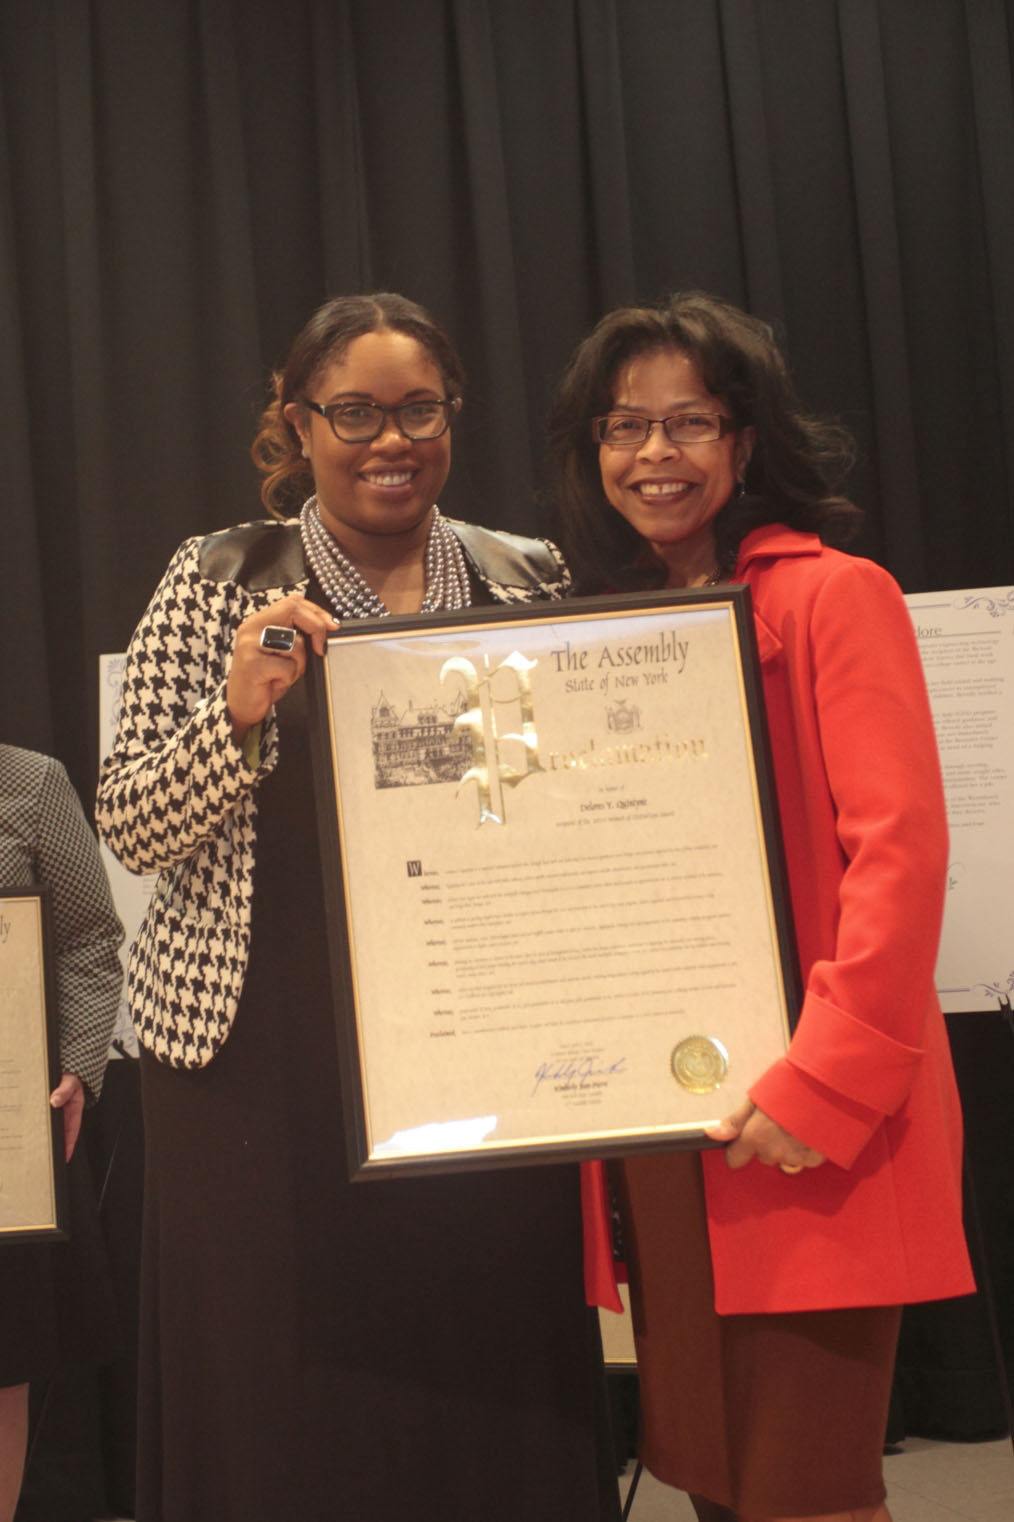 Assemblywoman Kimberly Jean and Madeline Quintyne, accepting the award on behalf of her mother, Dolores Quintyne, at the 2015 Women of Distinction Awards Ceremony